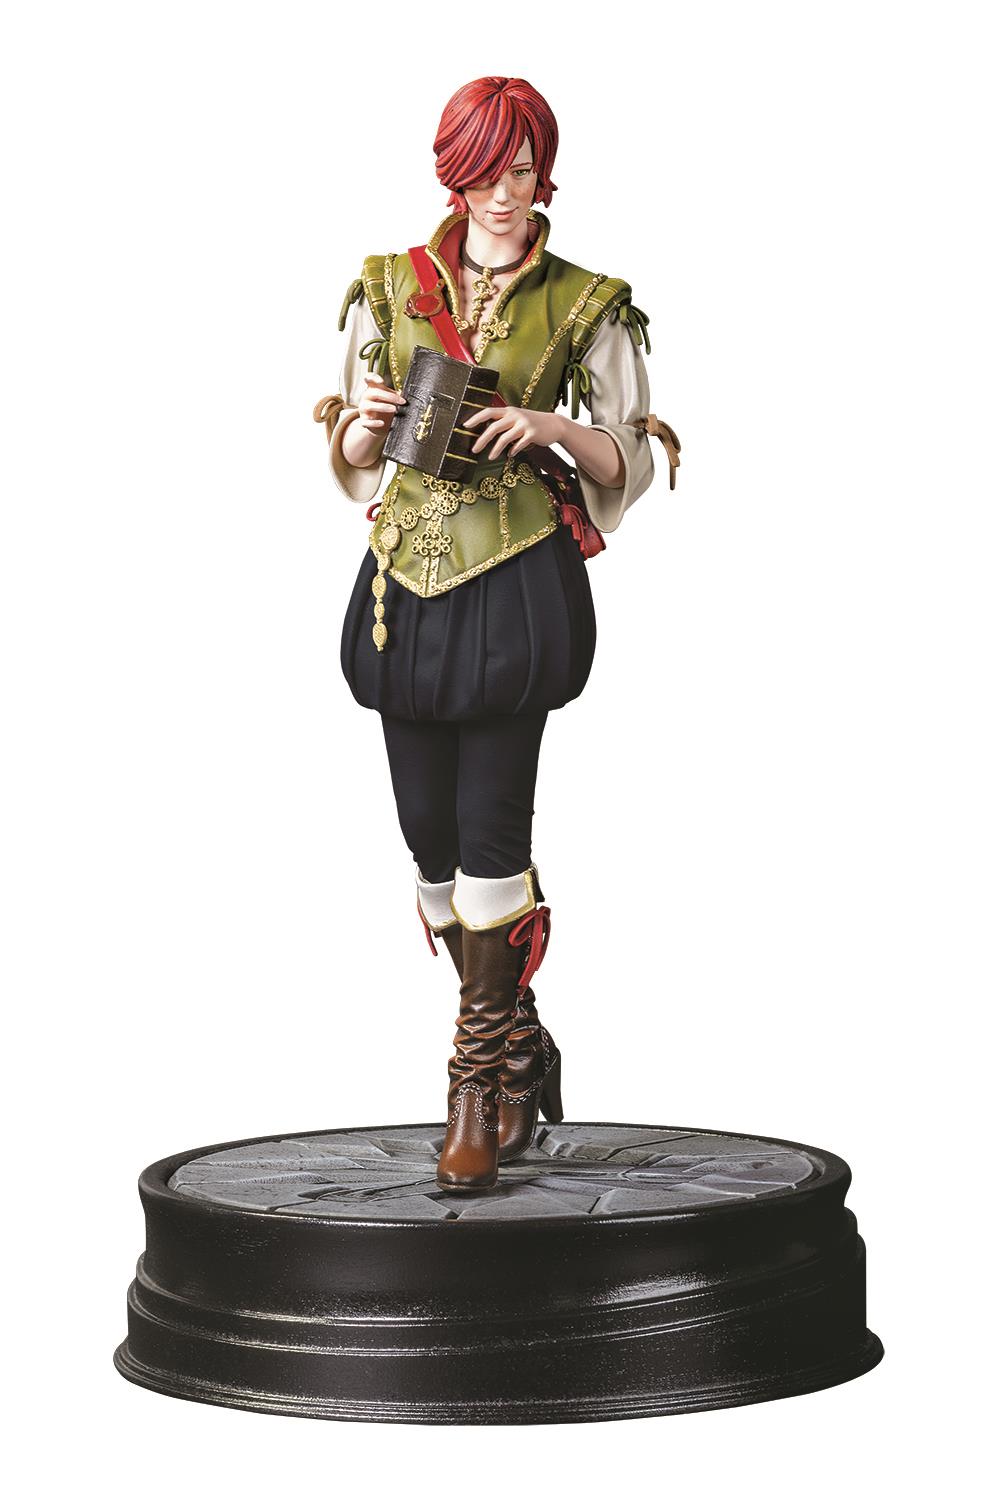 The Witcher 3 - The Wild Hunt: Shani Figure